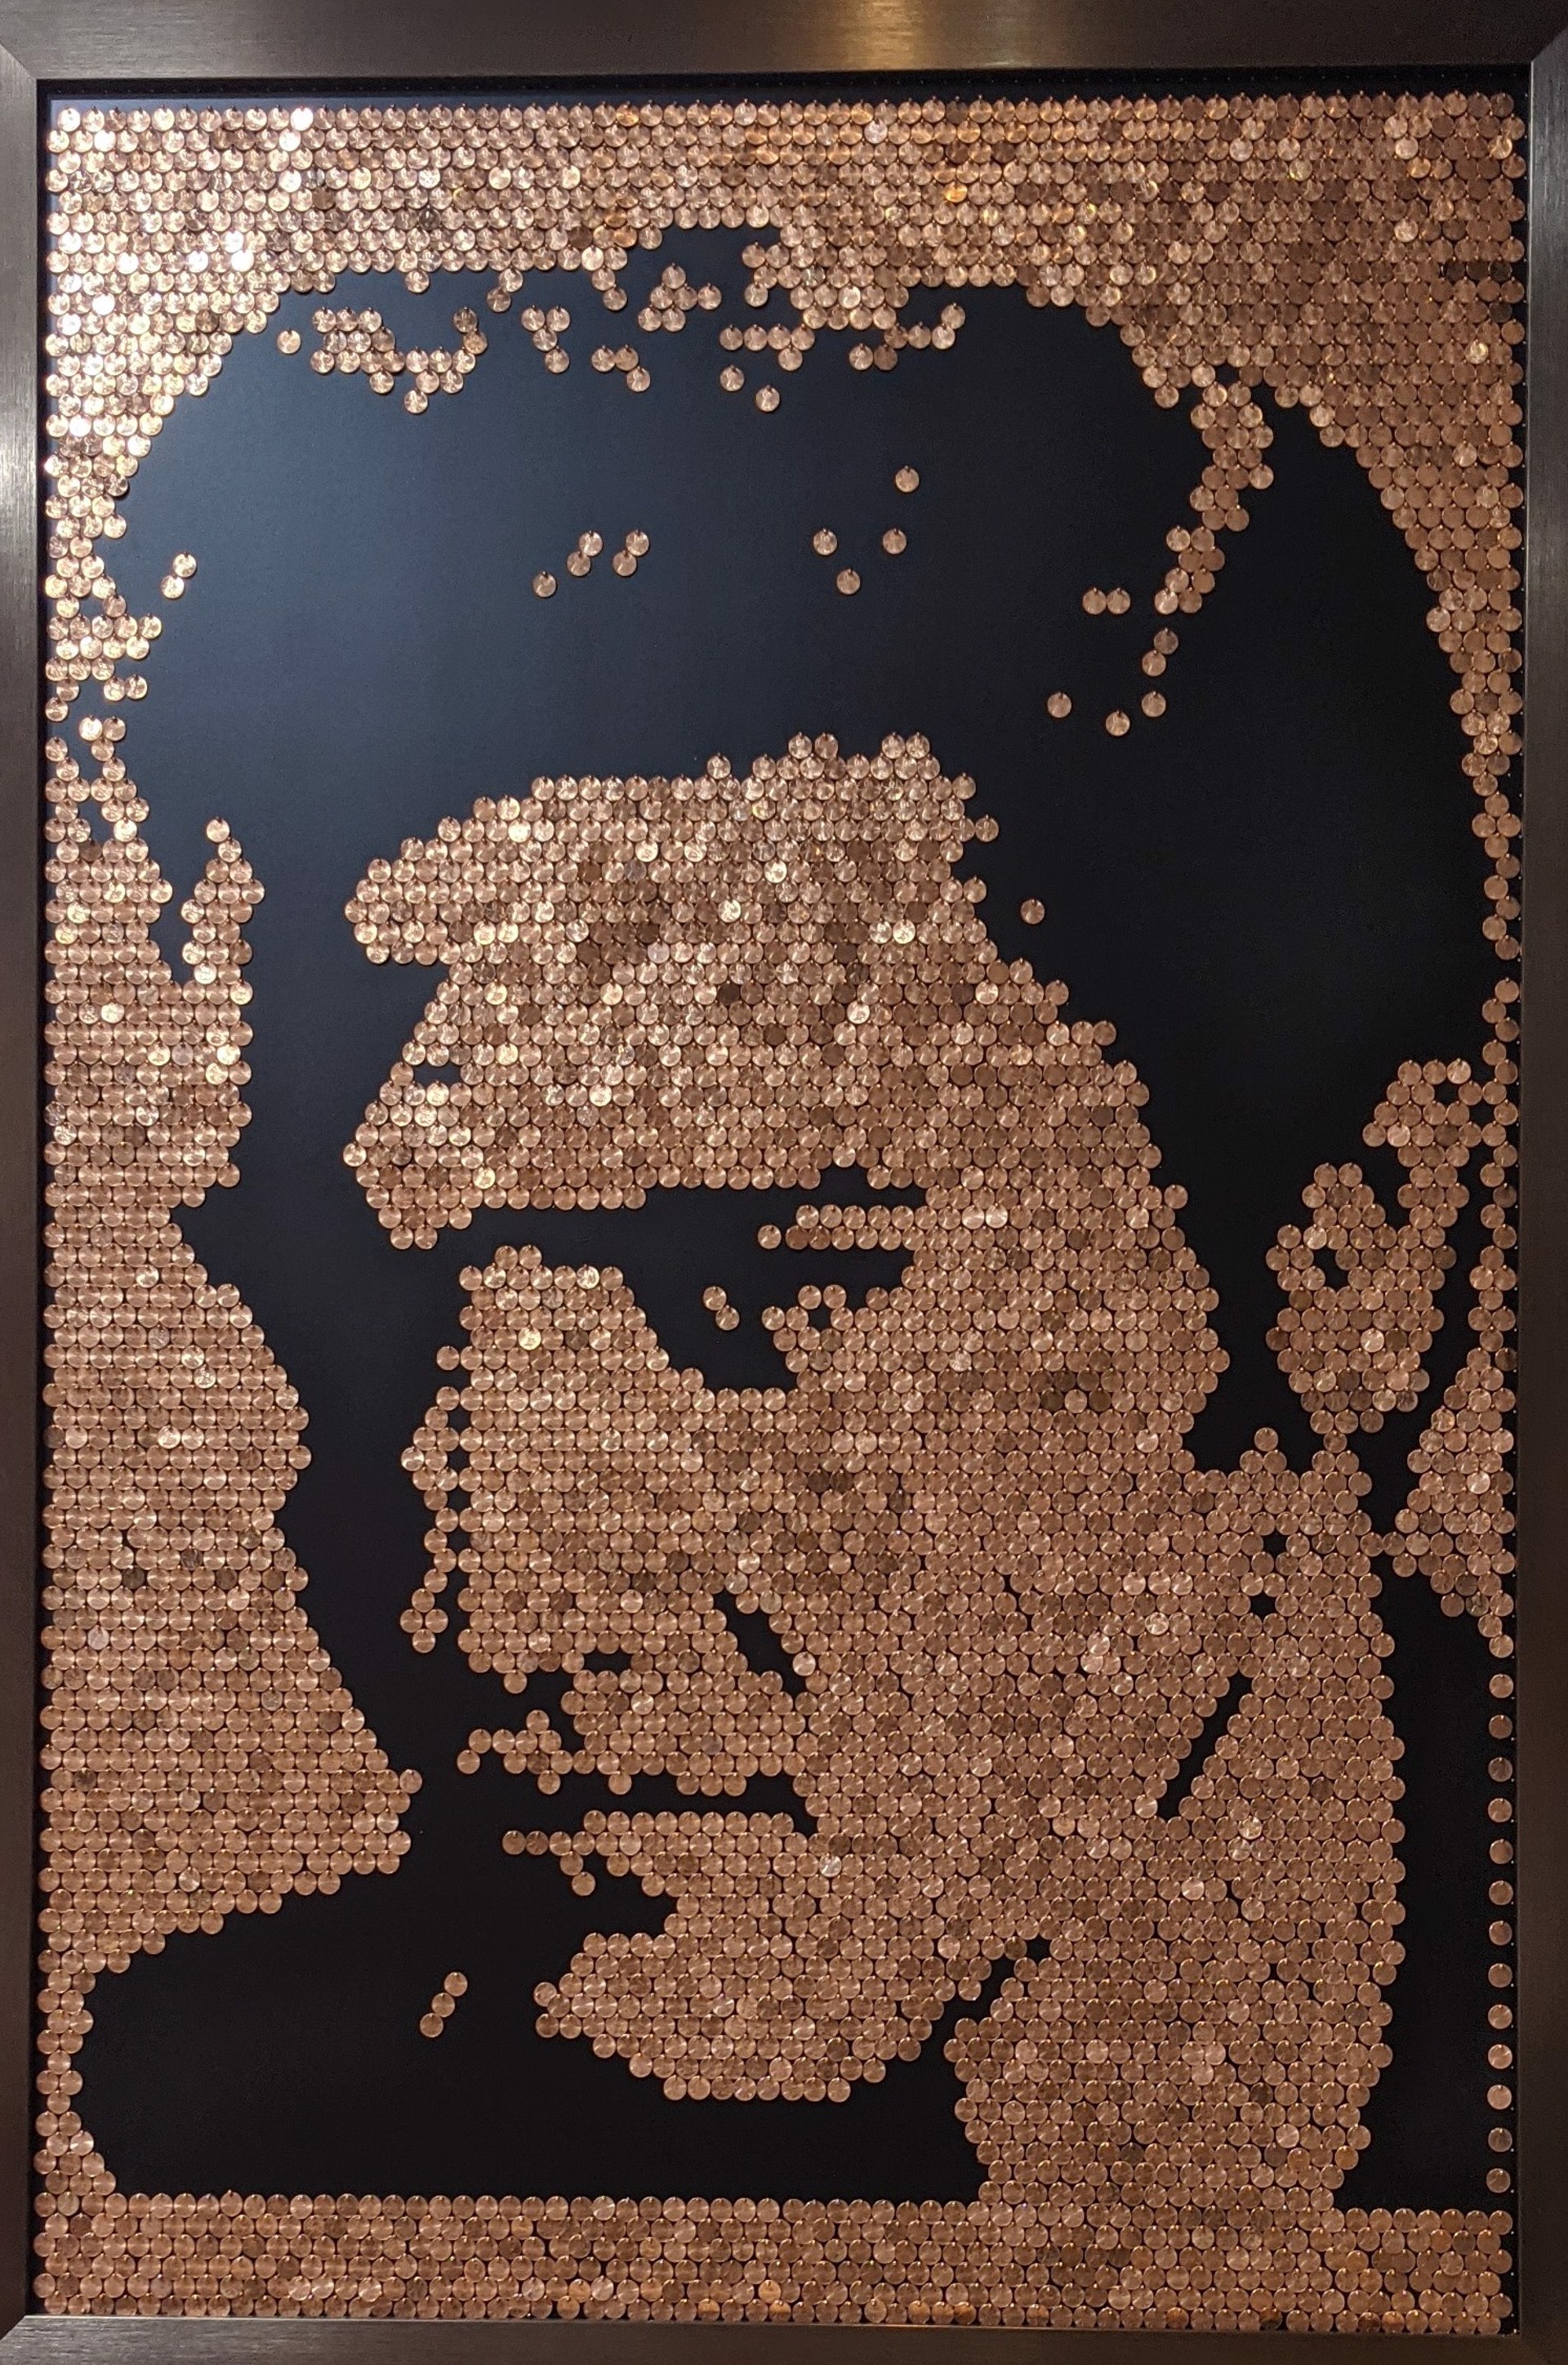 Penny Face "Elvis Presley" by "Coins & Sequins On Canvas" by Efi Mashiah